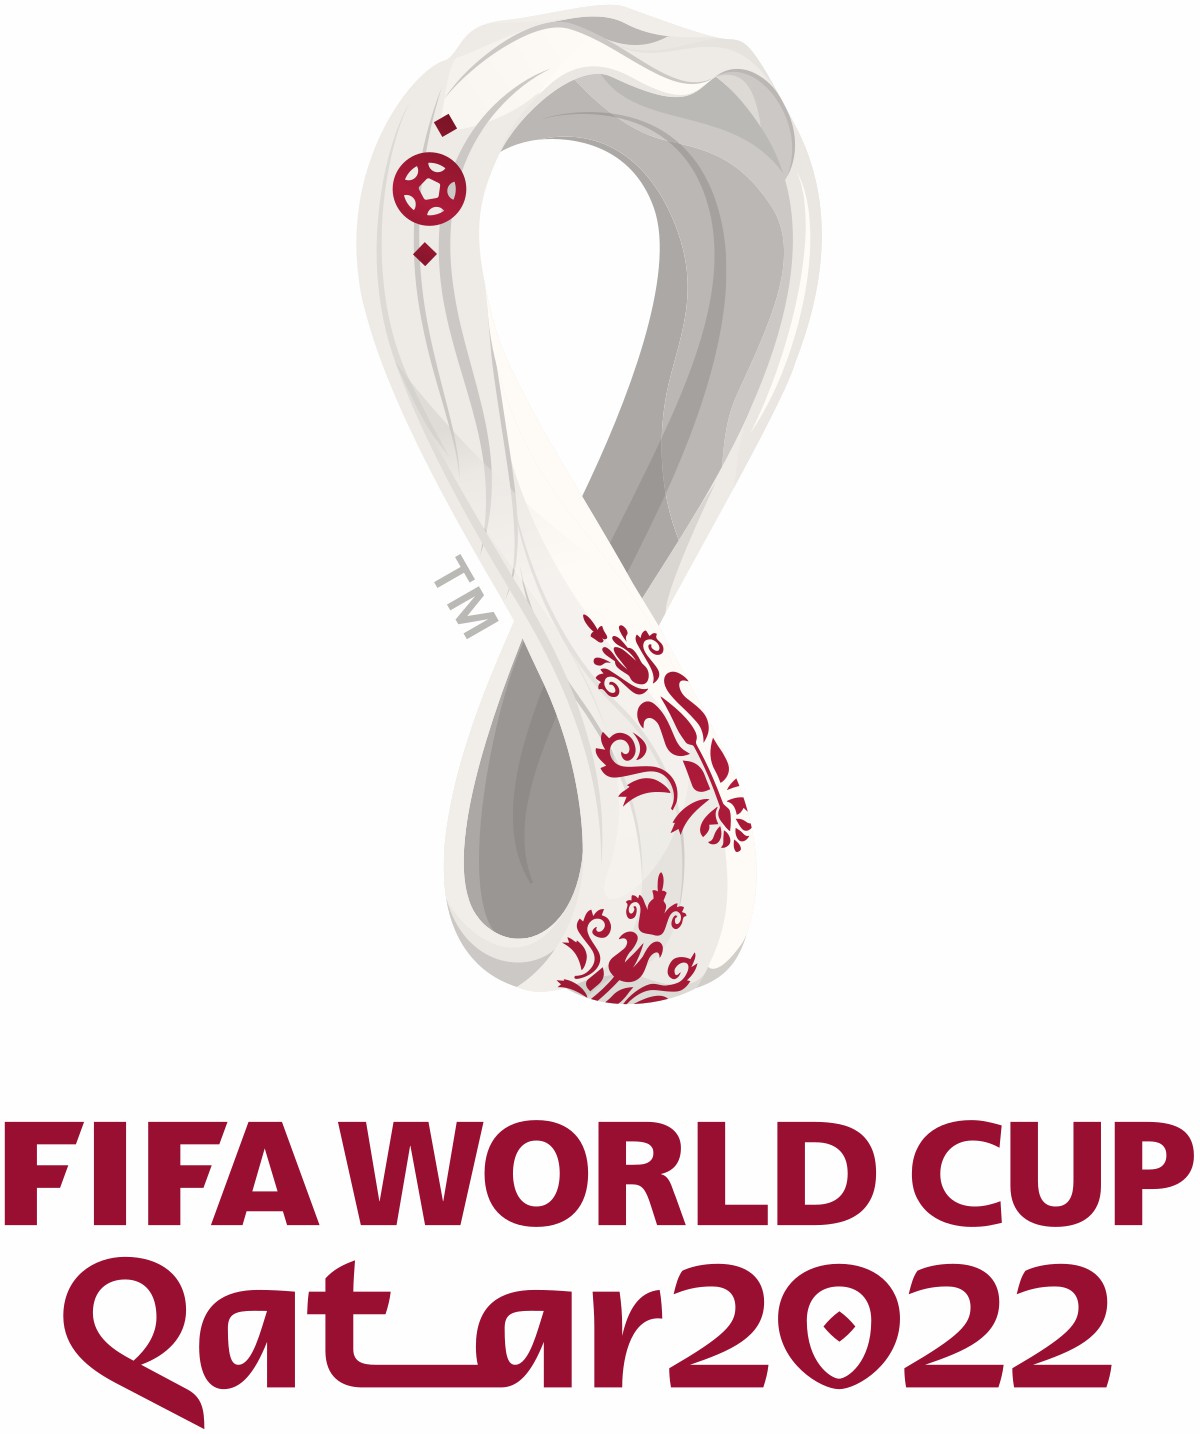 Qatar 2022 FIFA World Cup Group stage fixtures